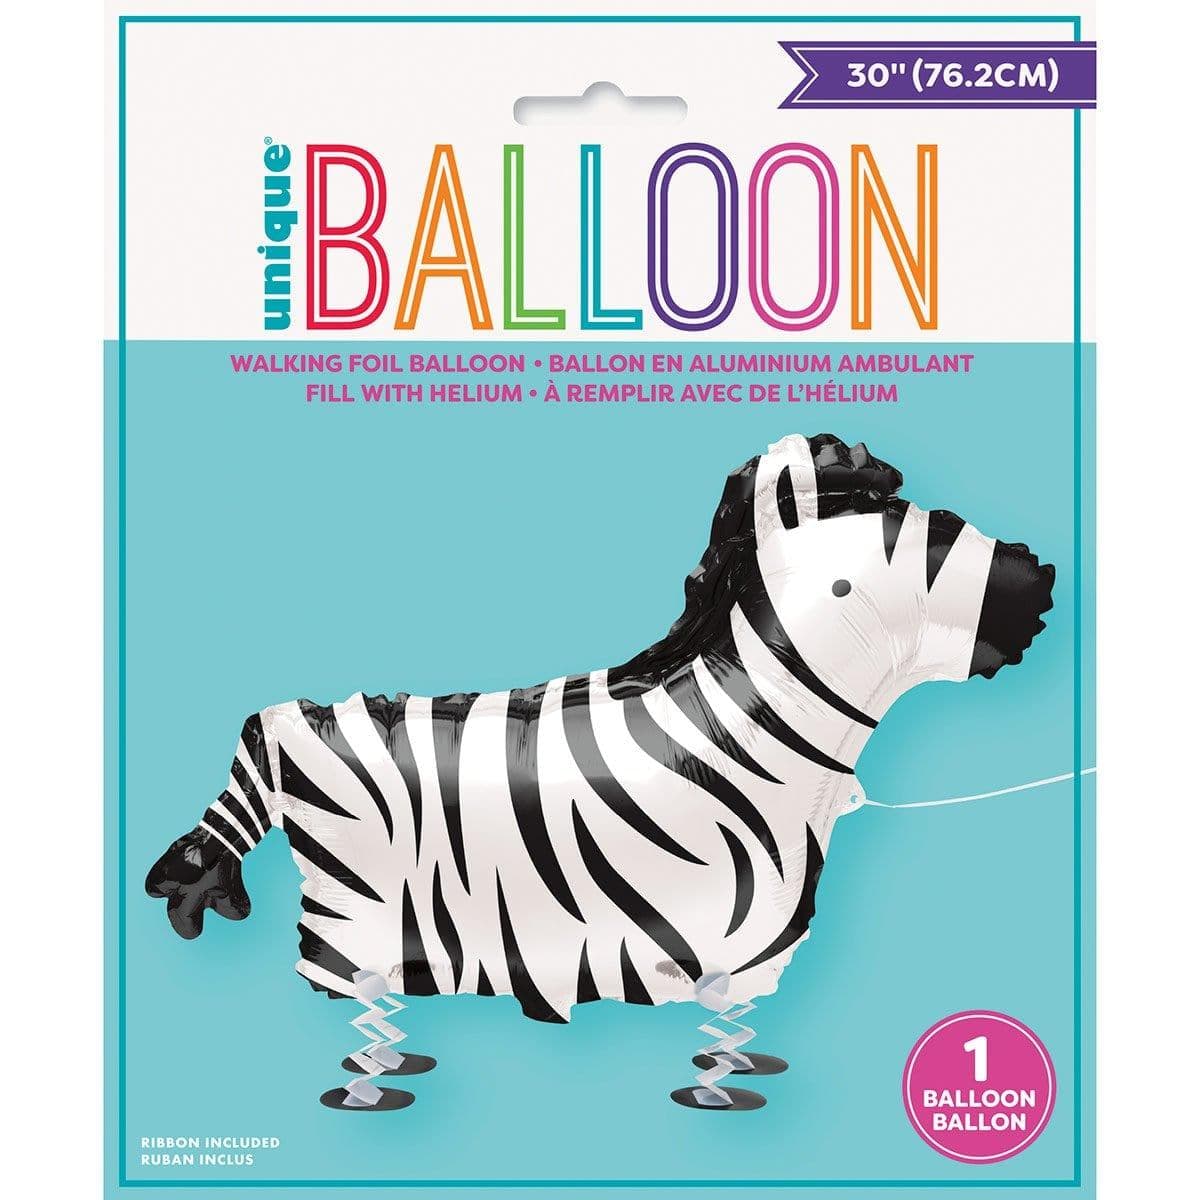 Buy Balloons Giant Zebra Air Walker Balloon sold at Party Expert